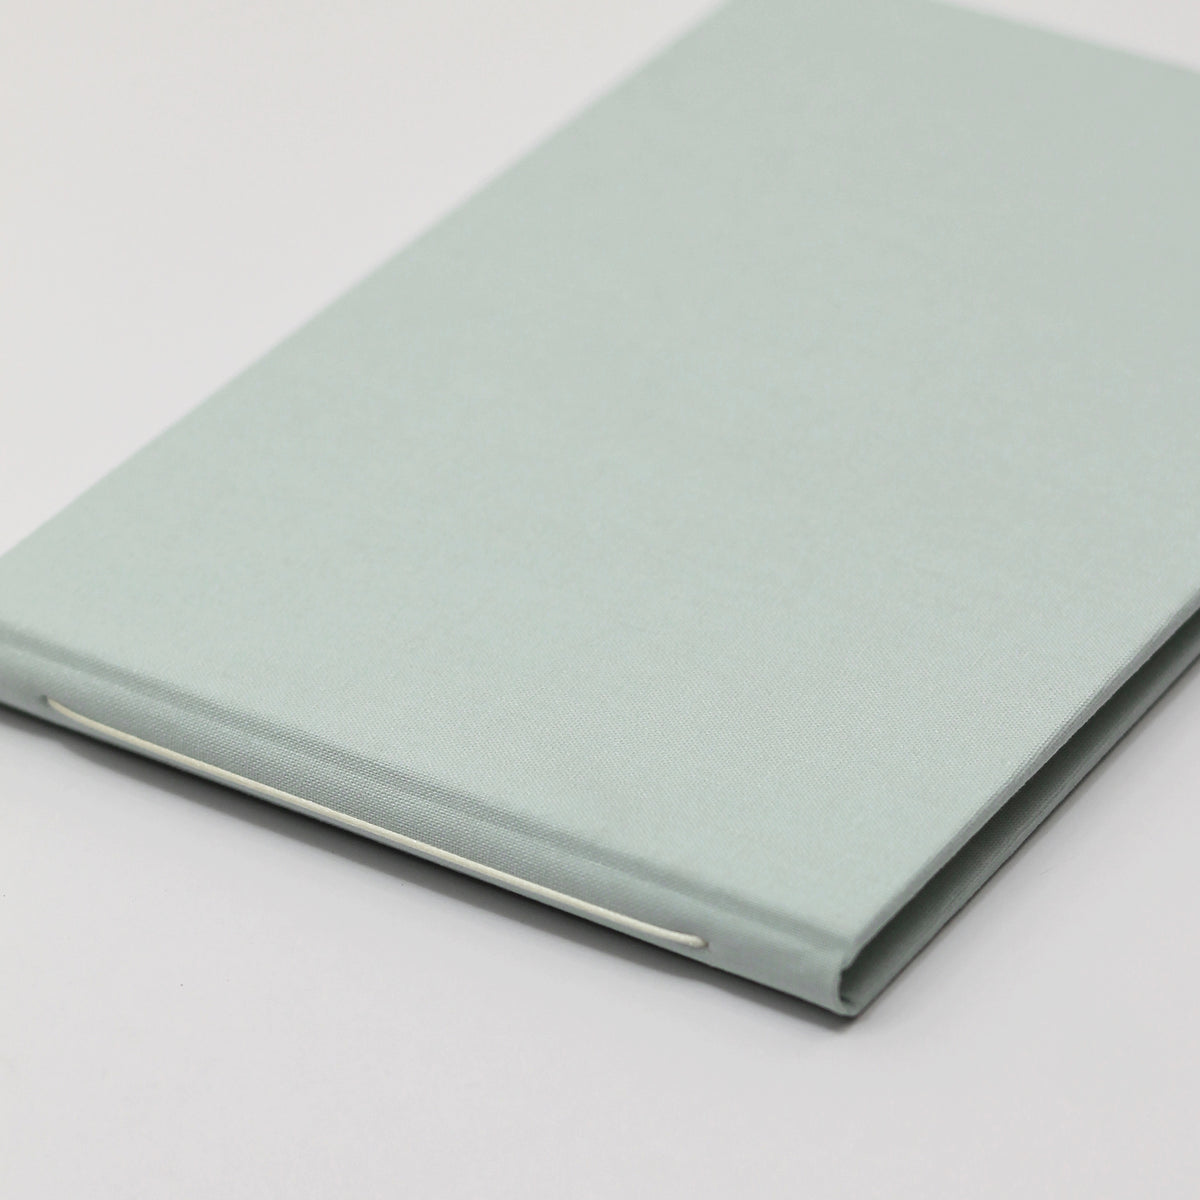 Guestbook Embossed with “Guests” | Cover: Pastel Blue Cotton | Available Personalized